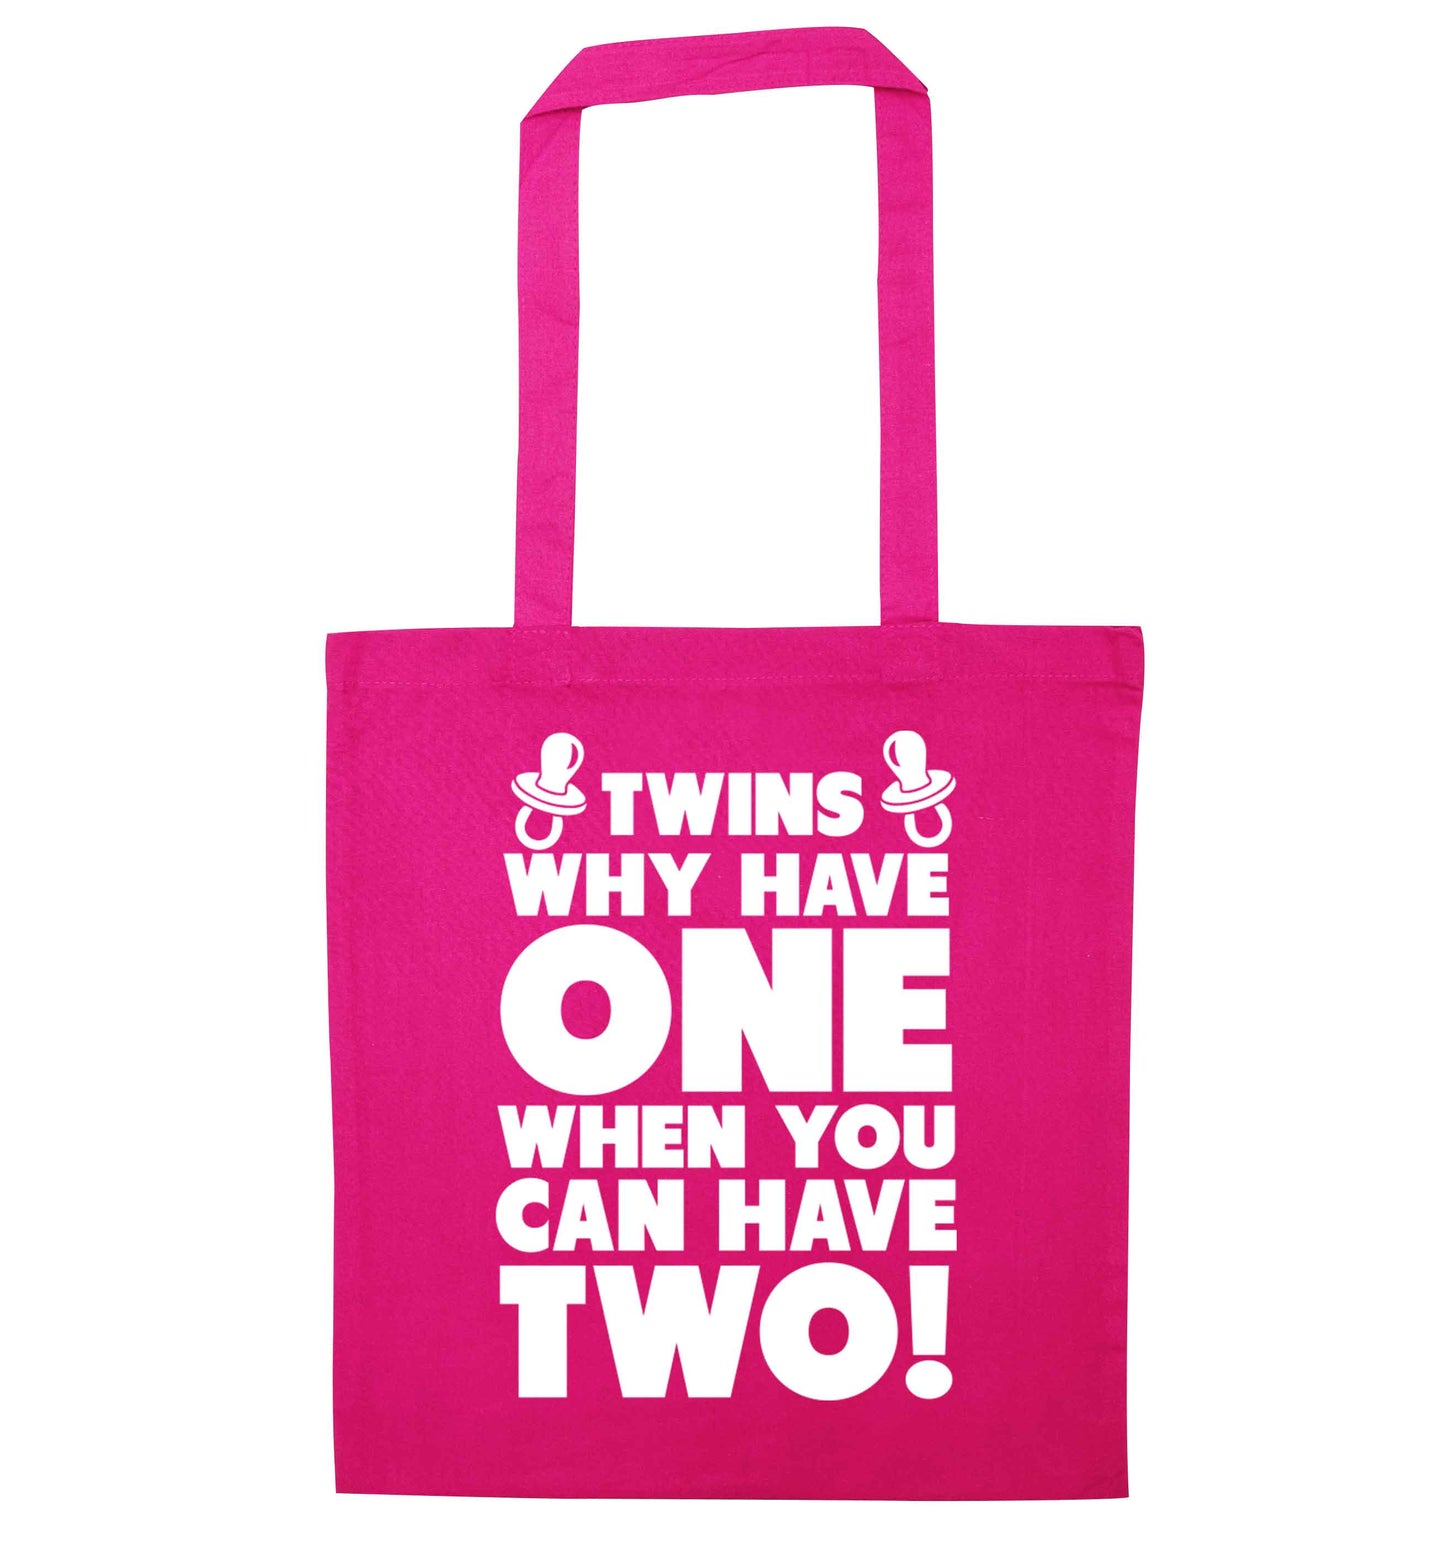 Twins why have one when you can have two pink tote bag